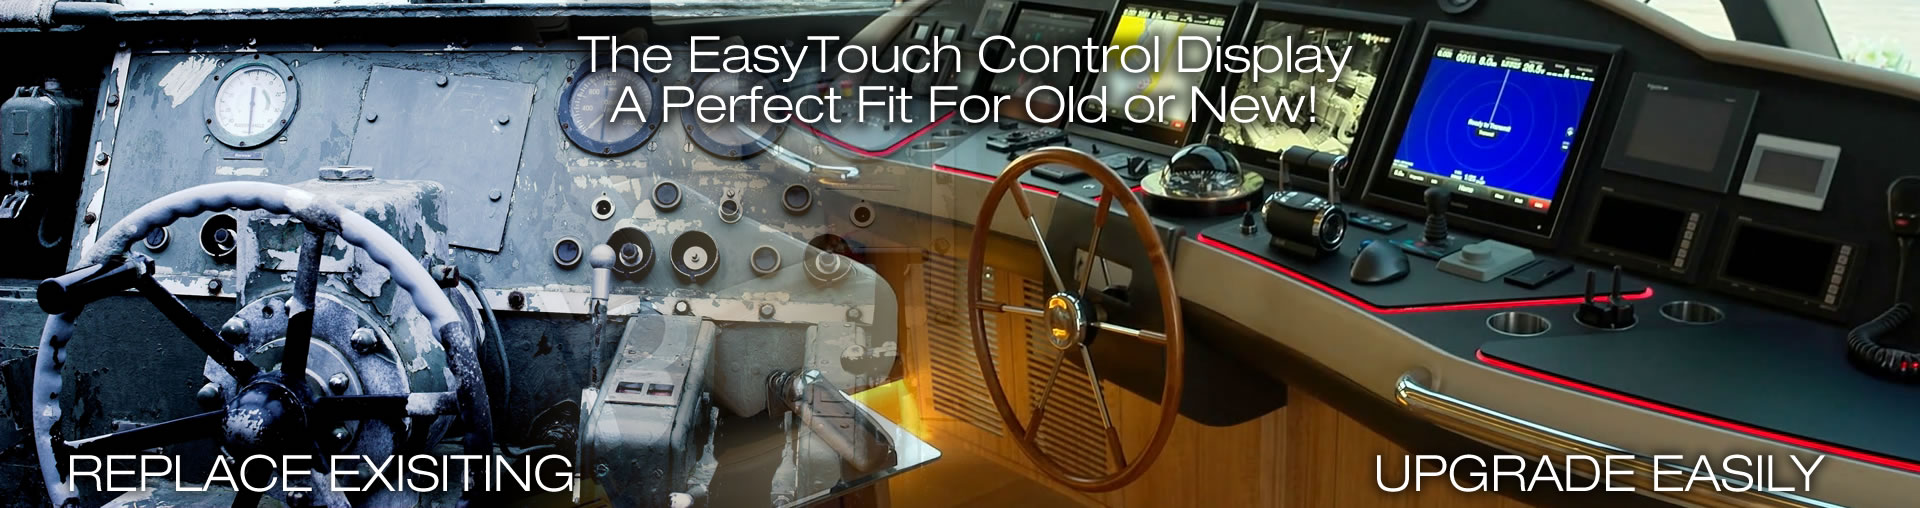 EasyTouch Control Display - A Perfect Fit for Old or New Vessels